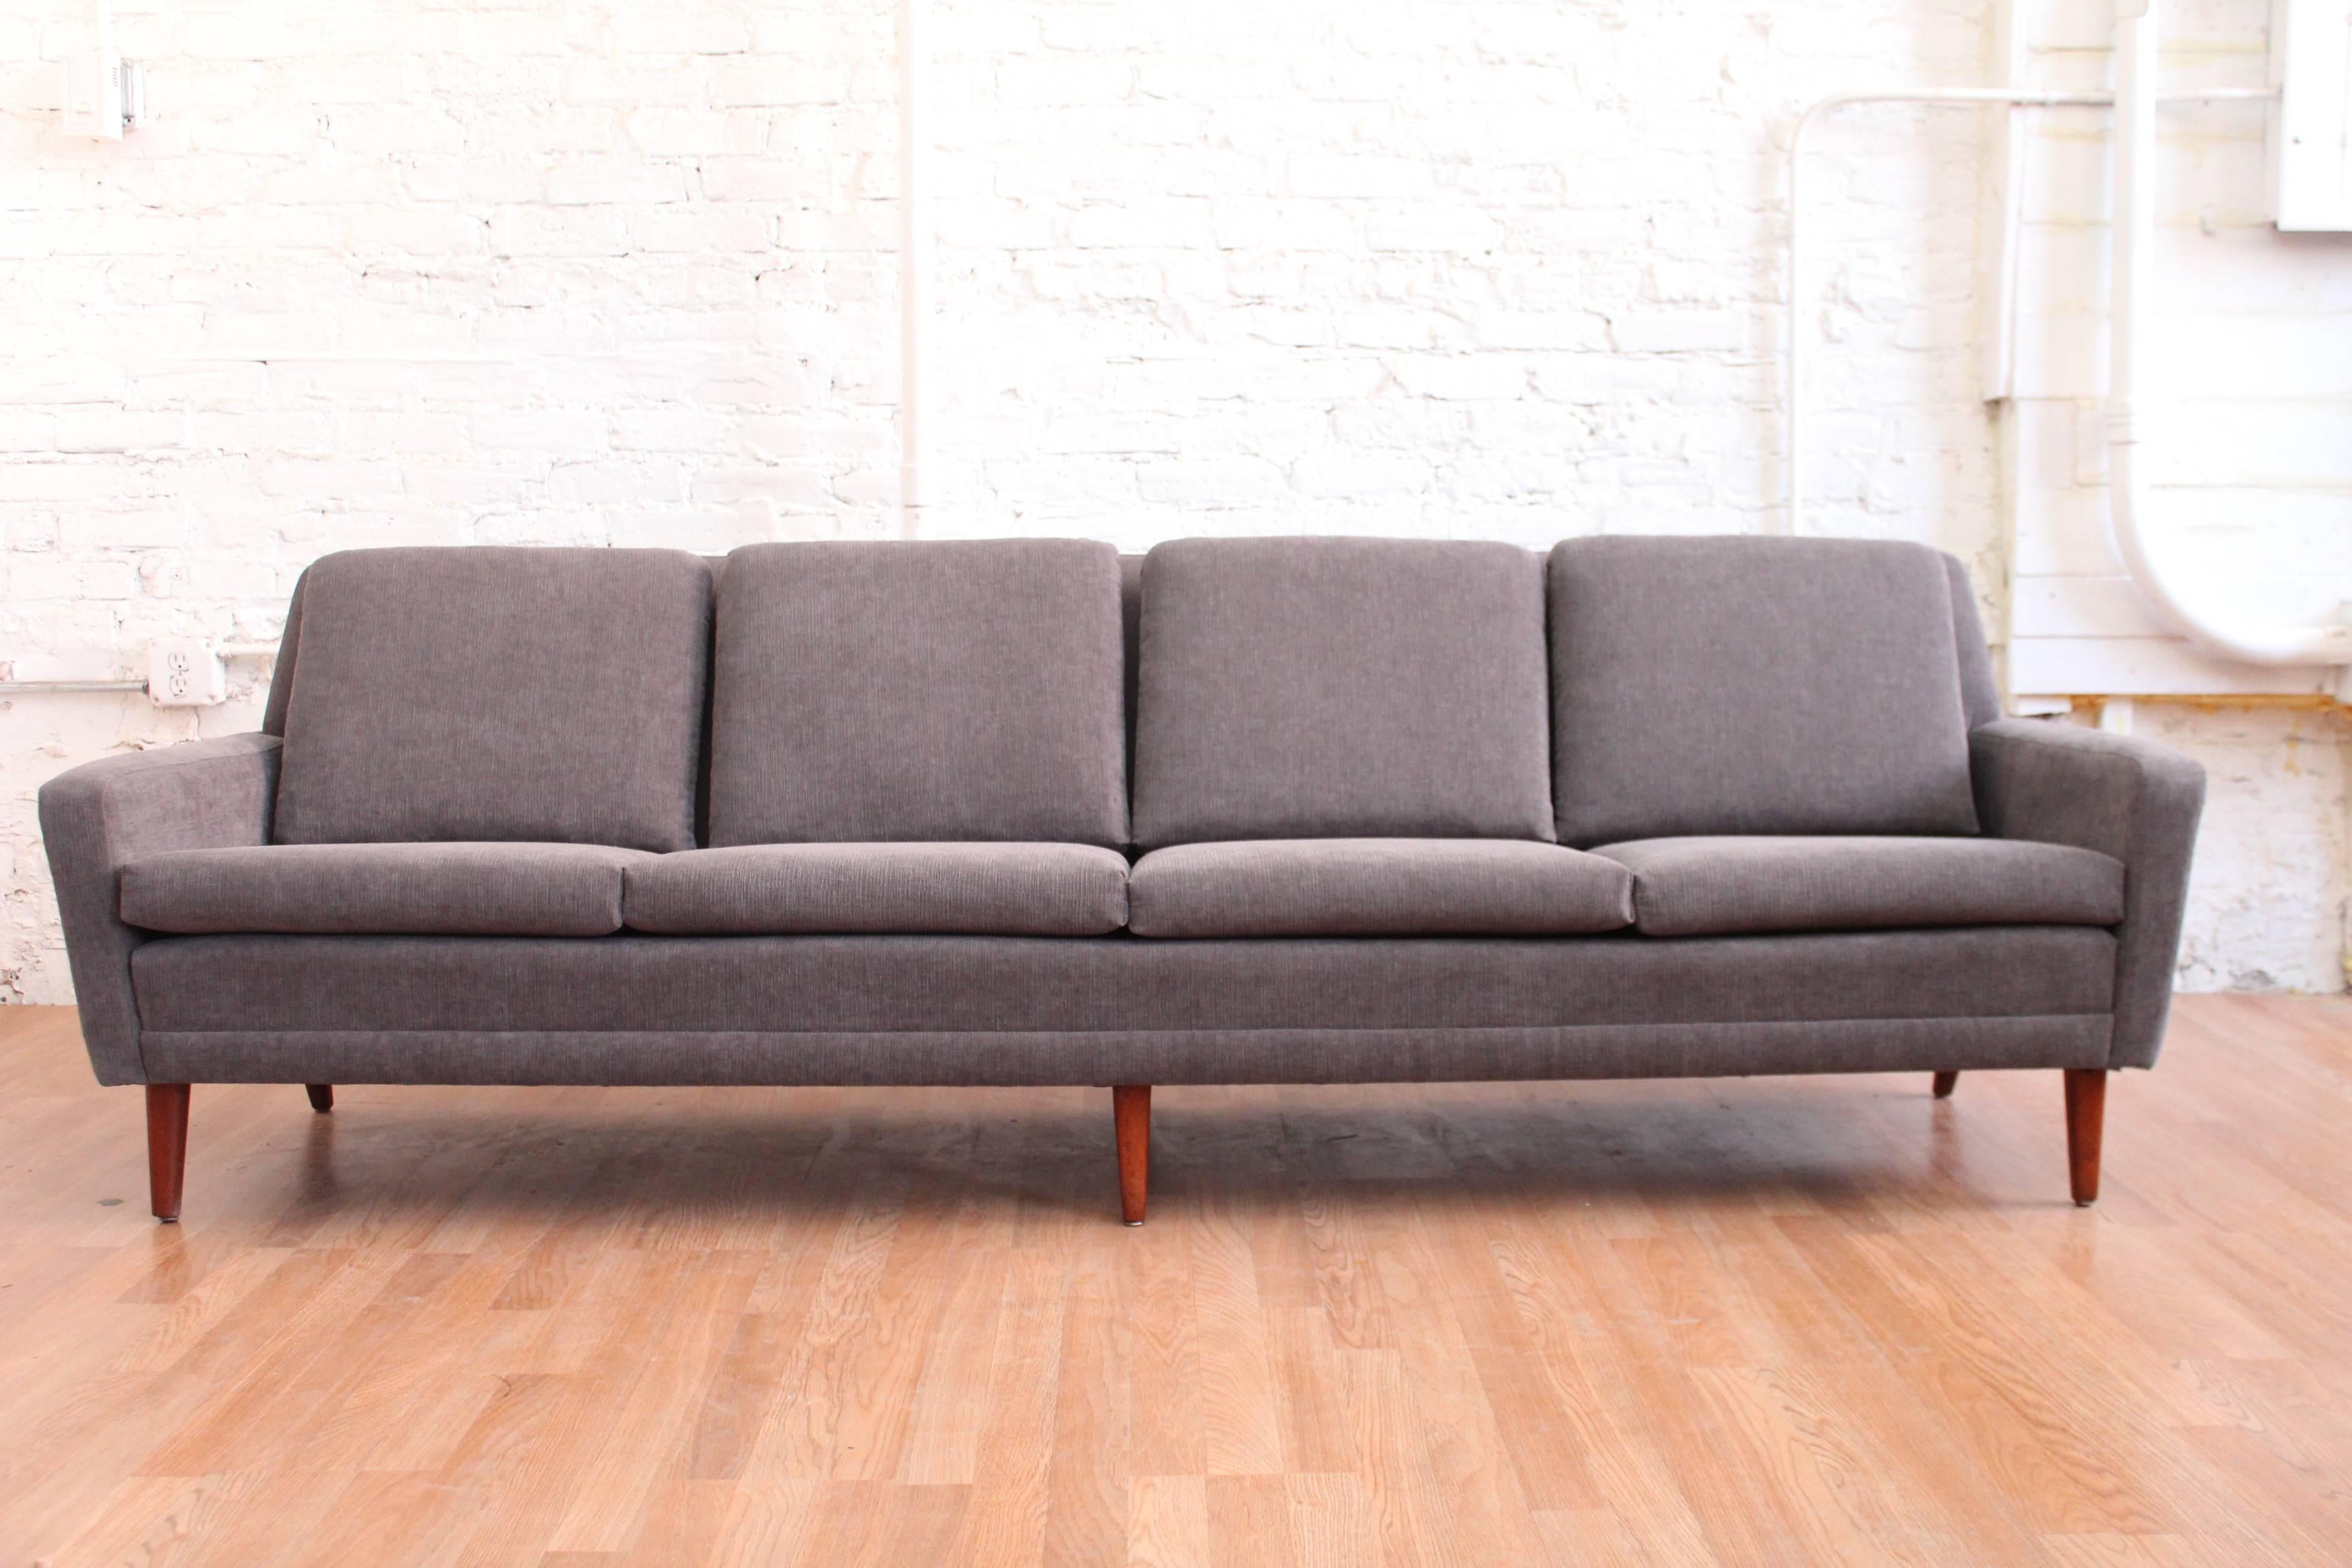 Folkes Ohlsson for Dux! This is the modernists/modernista's dream sofa. The unicorn if you will. Isn't it time for you to capture this elusive sexy beast?! Newly and perfectly re-upholstered in our signature Gentlemens grey fabric. The design is